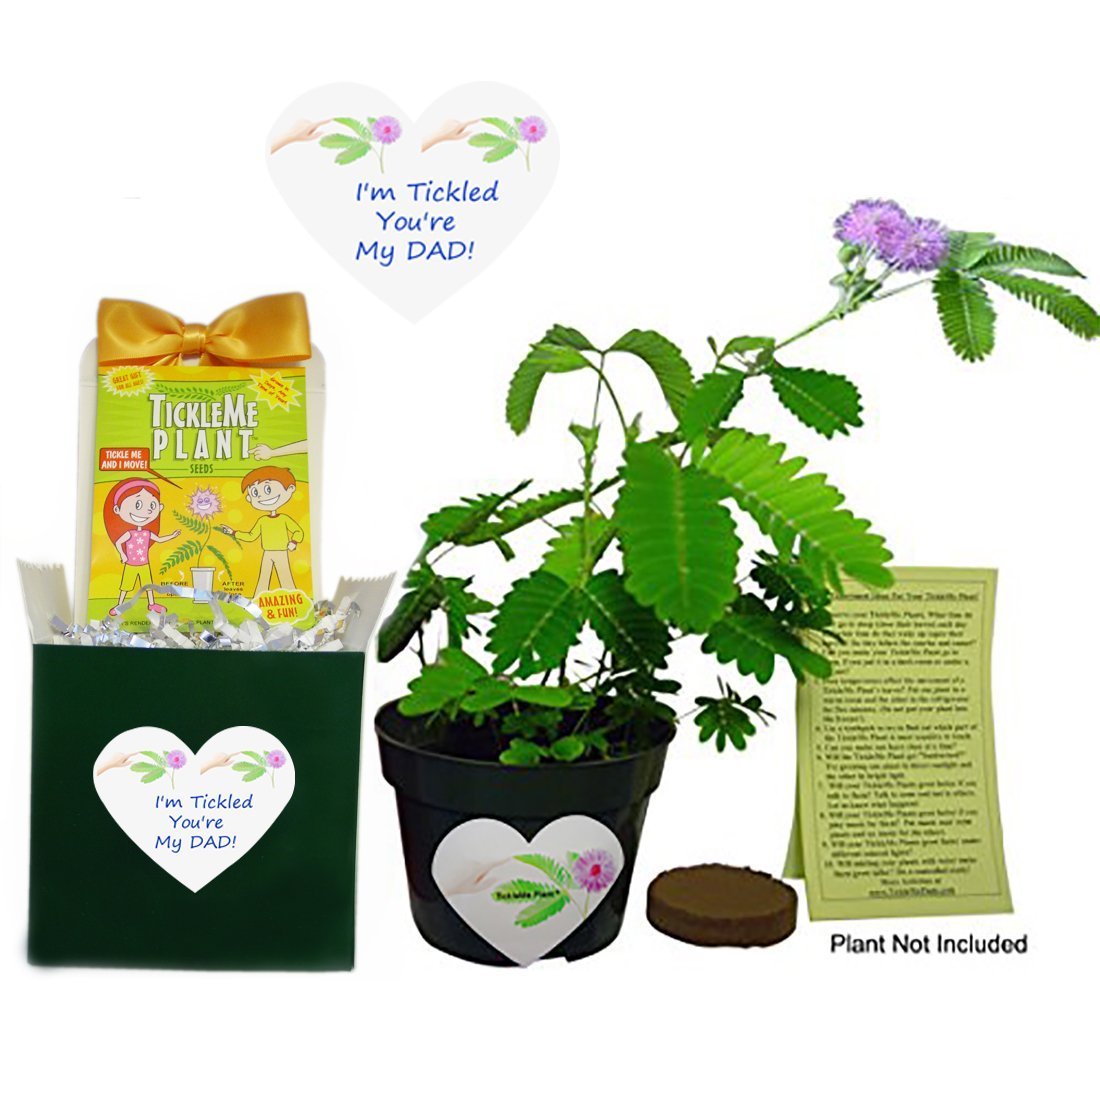 Birthday Gift or Father's Day Gift For Dad -TickleMe Plant Box Set - For the Dad that has everything